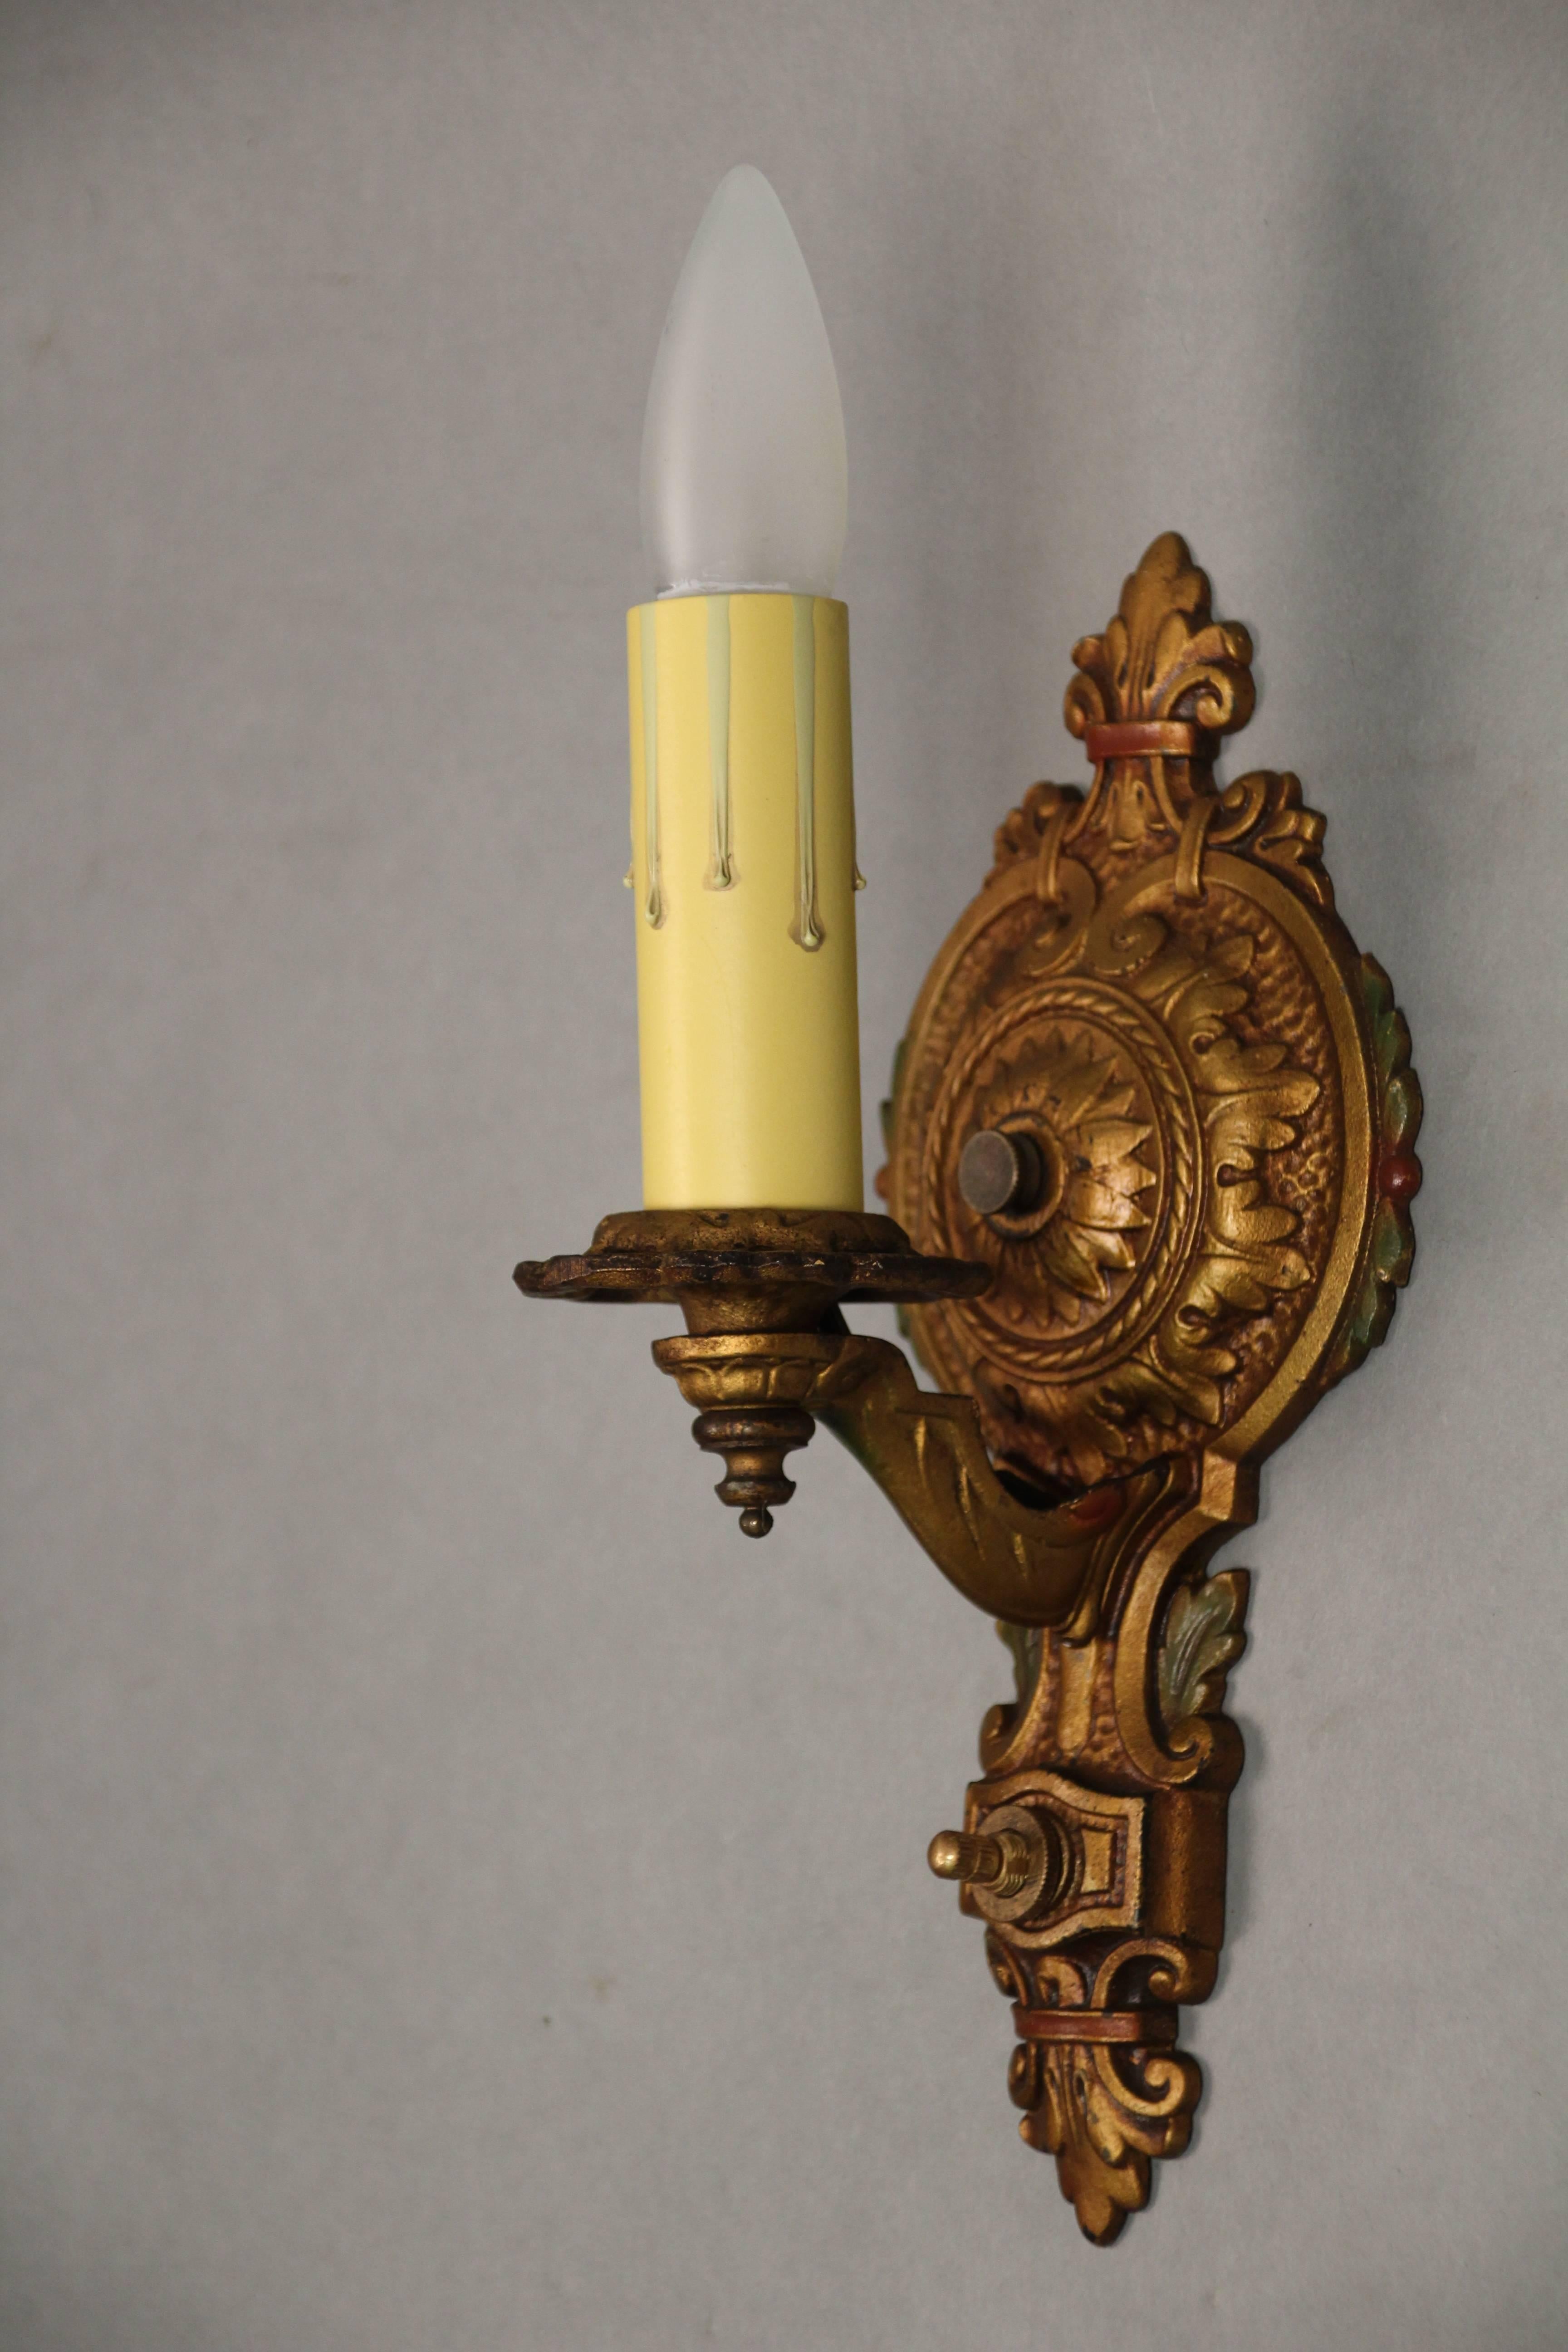 1 of 3 single all original 1920s single sconce with polychrome sconce with beautiful casting.